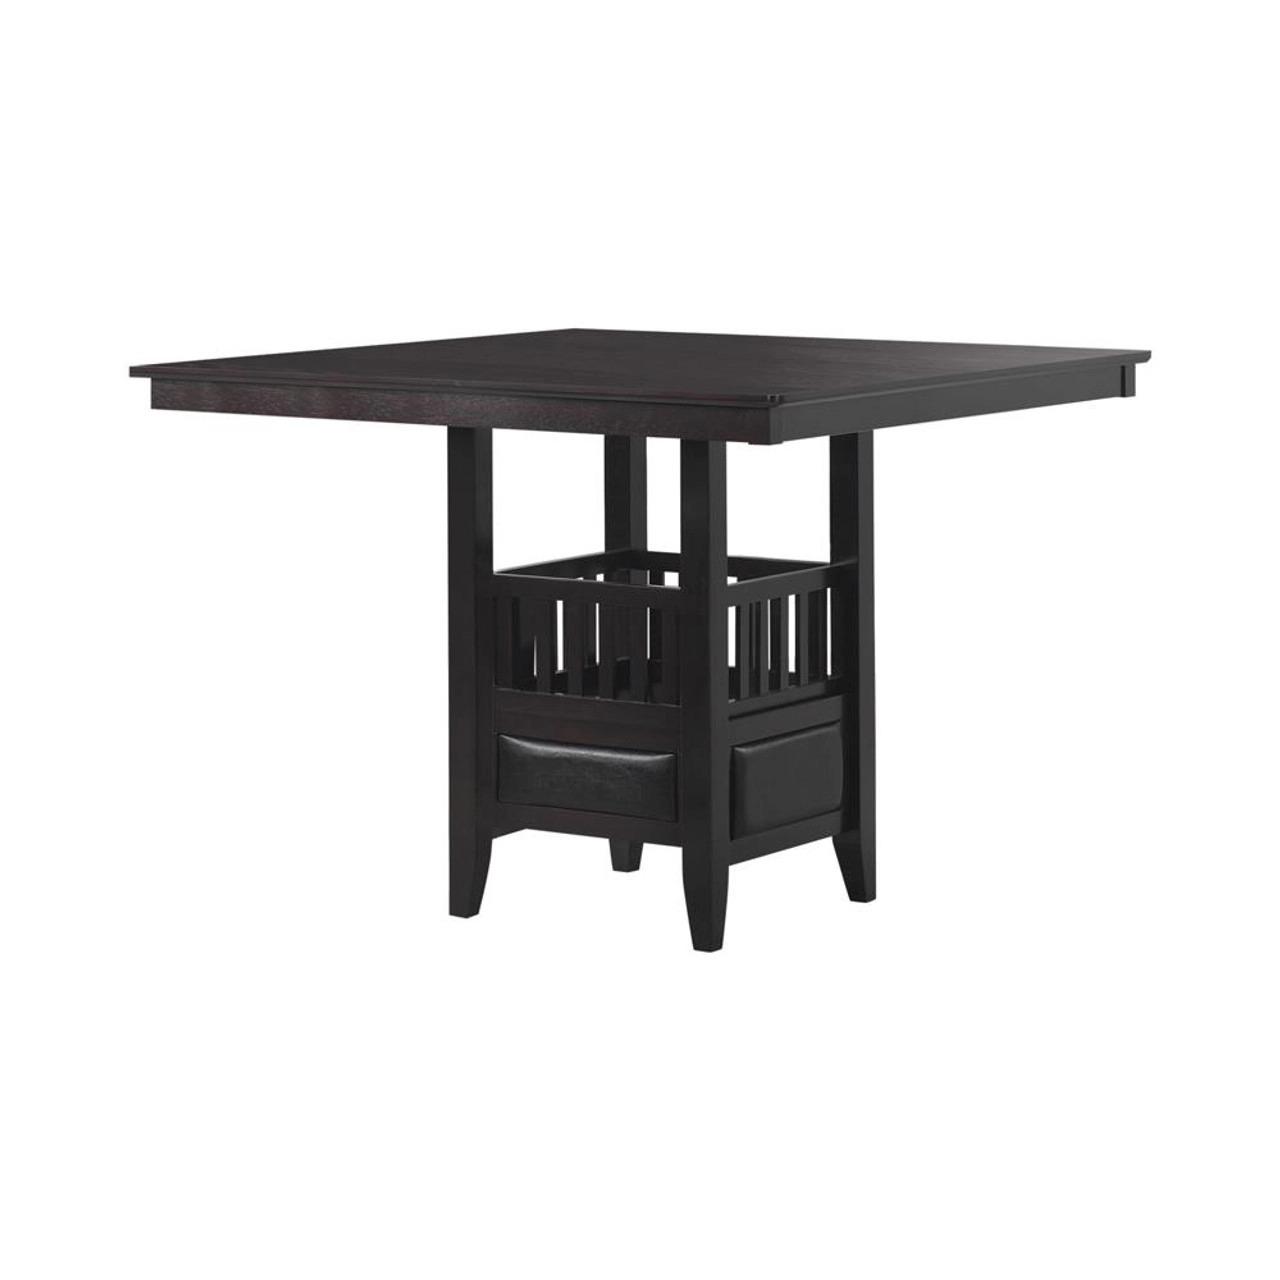 Transitional Counter Height Table 100958 Jaden 100958 in Espresso 